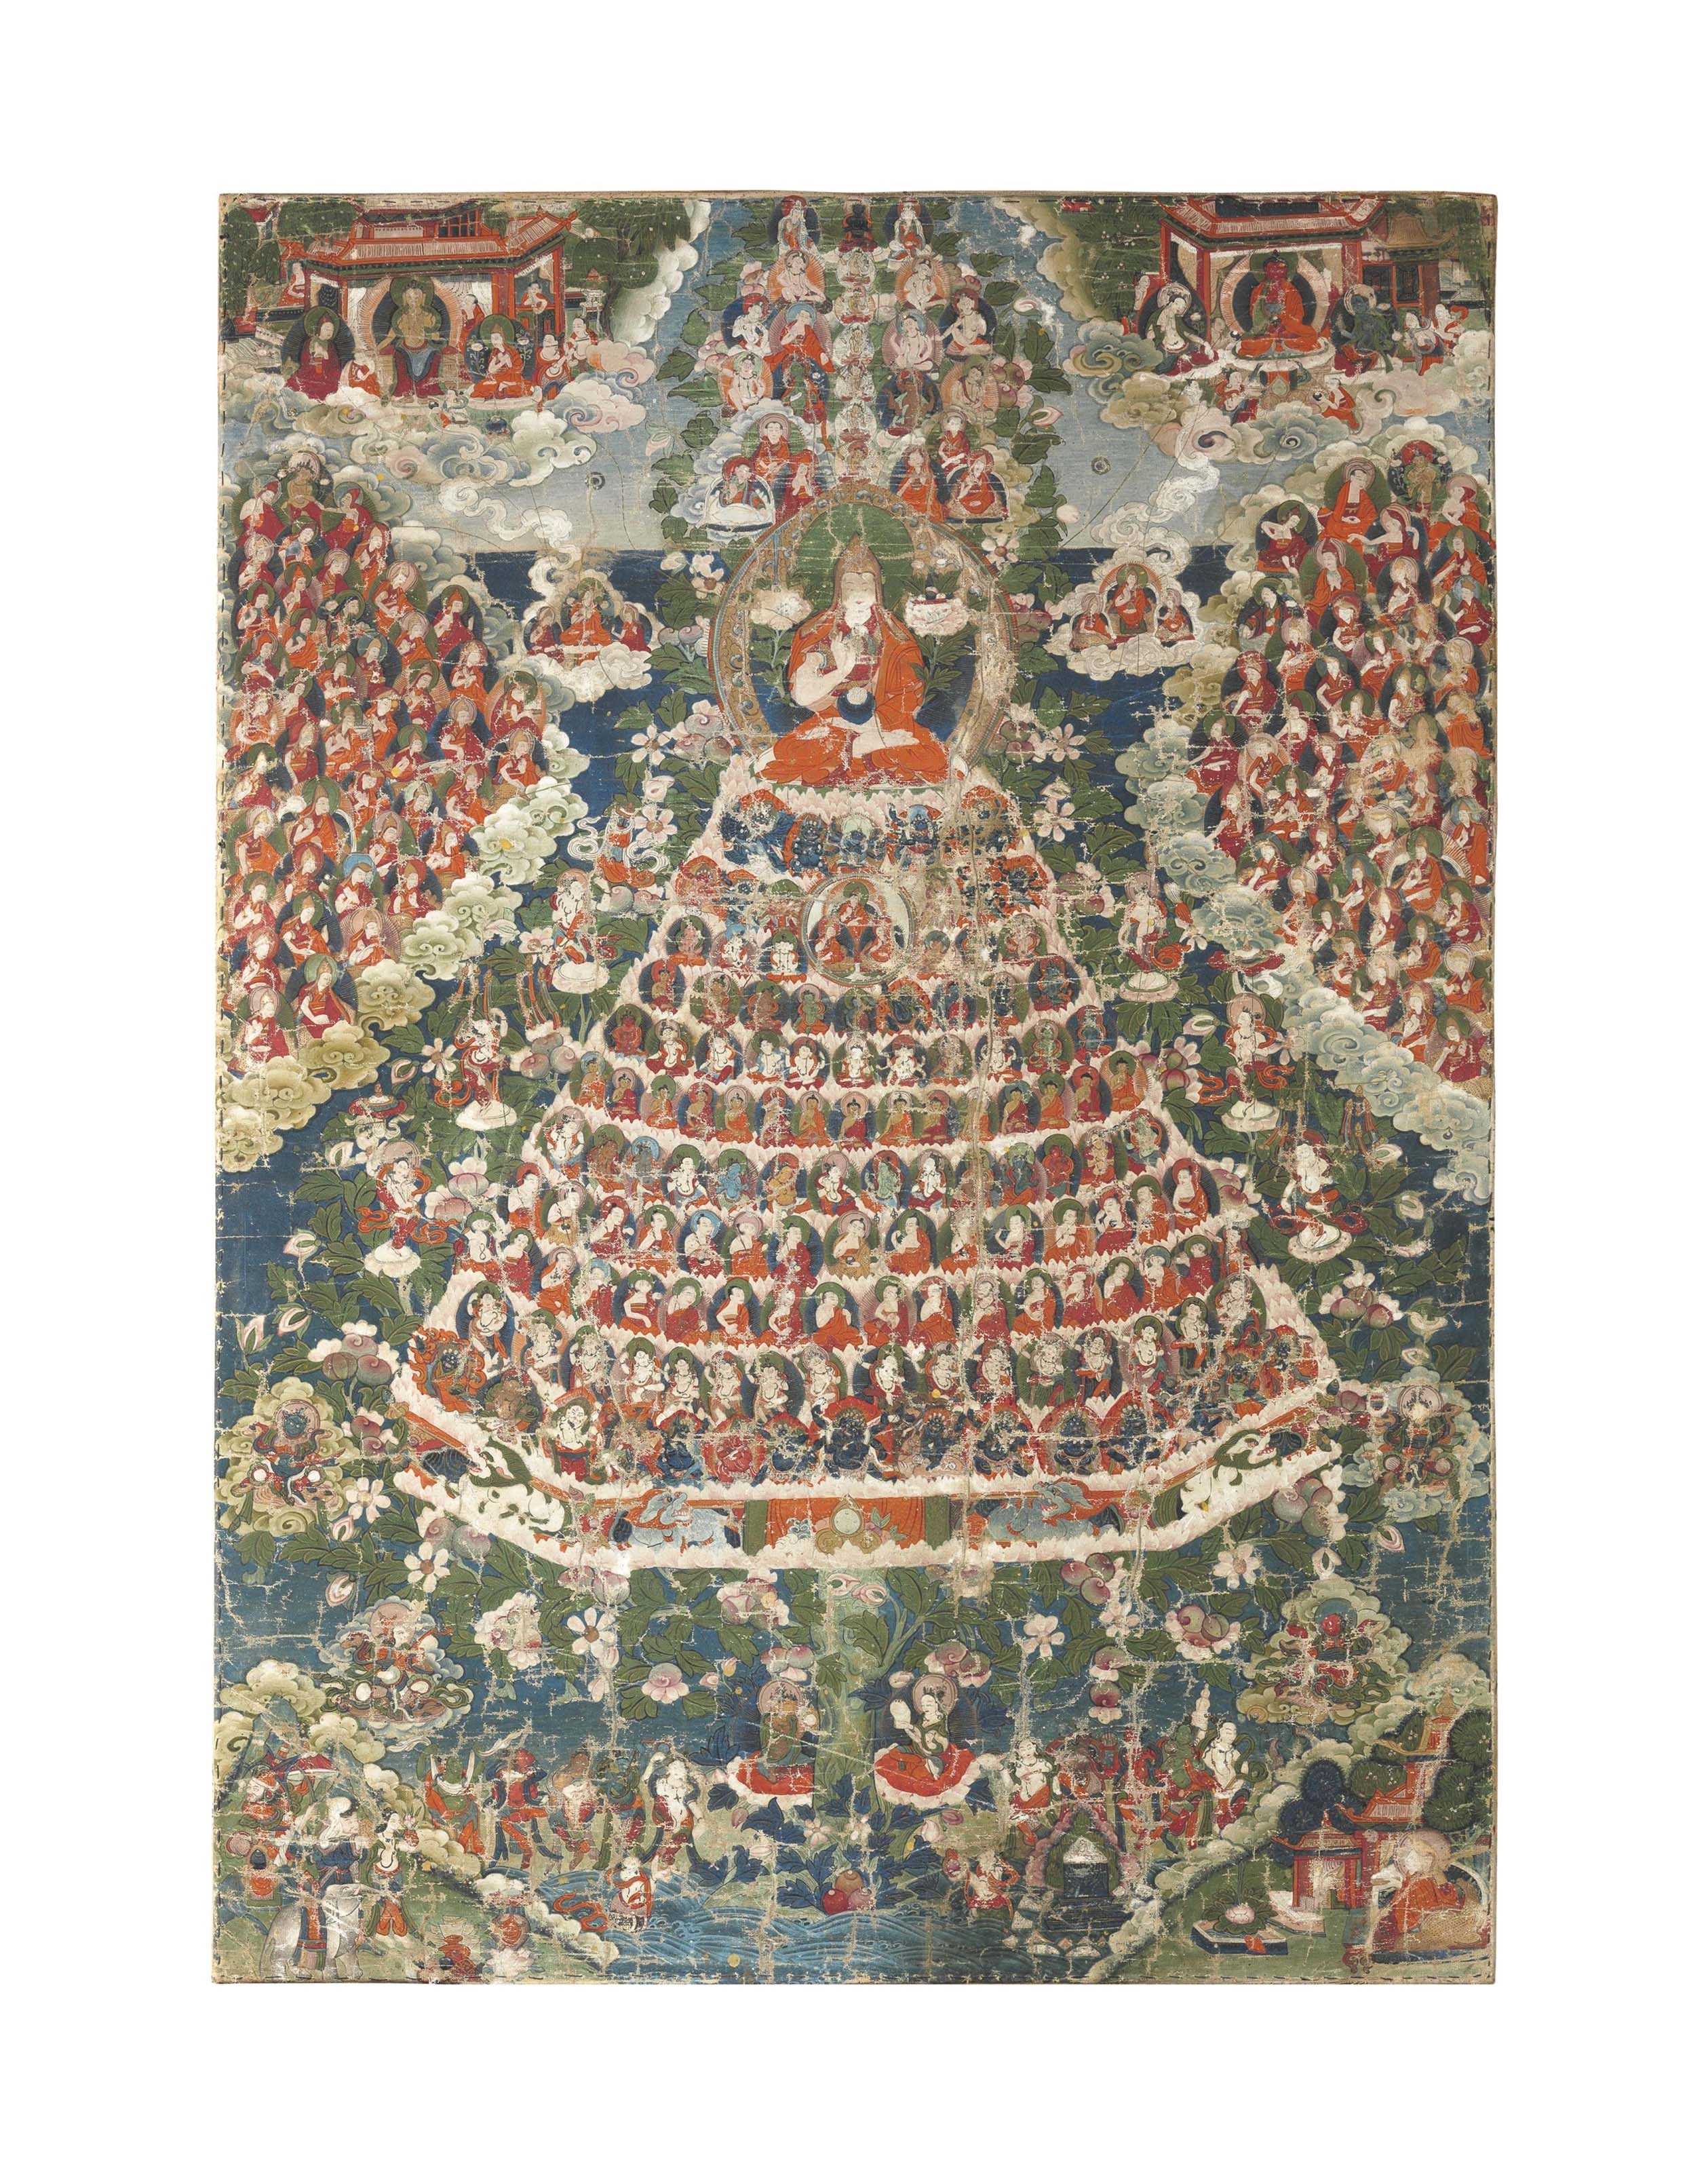 A painting of Tsongkhapa and the Field for the Accumulation of Merit by Tibetan School, 18th Century, 18th century